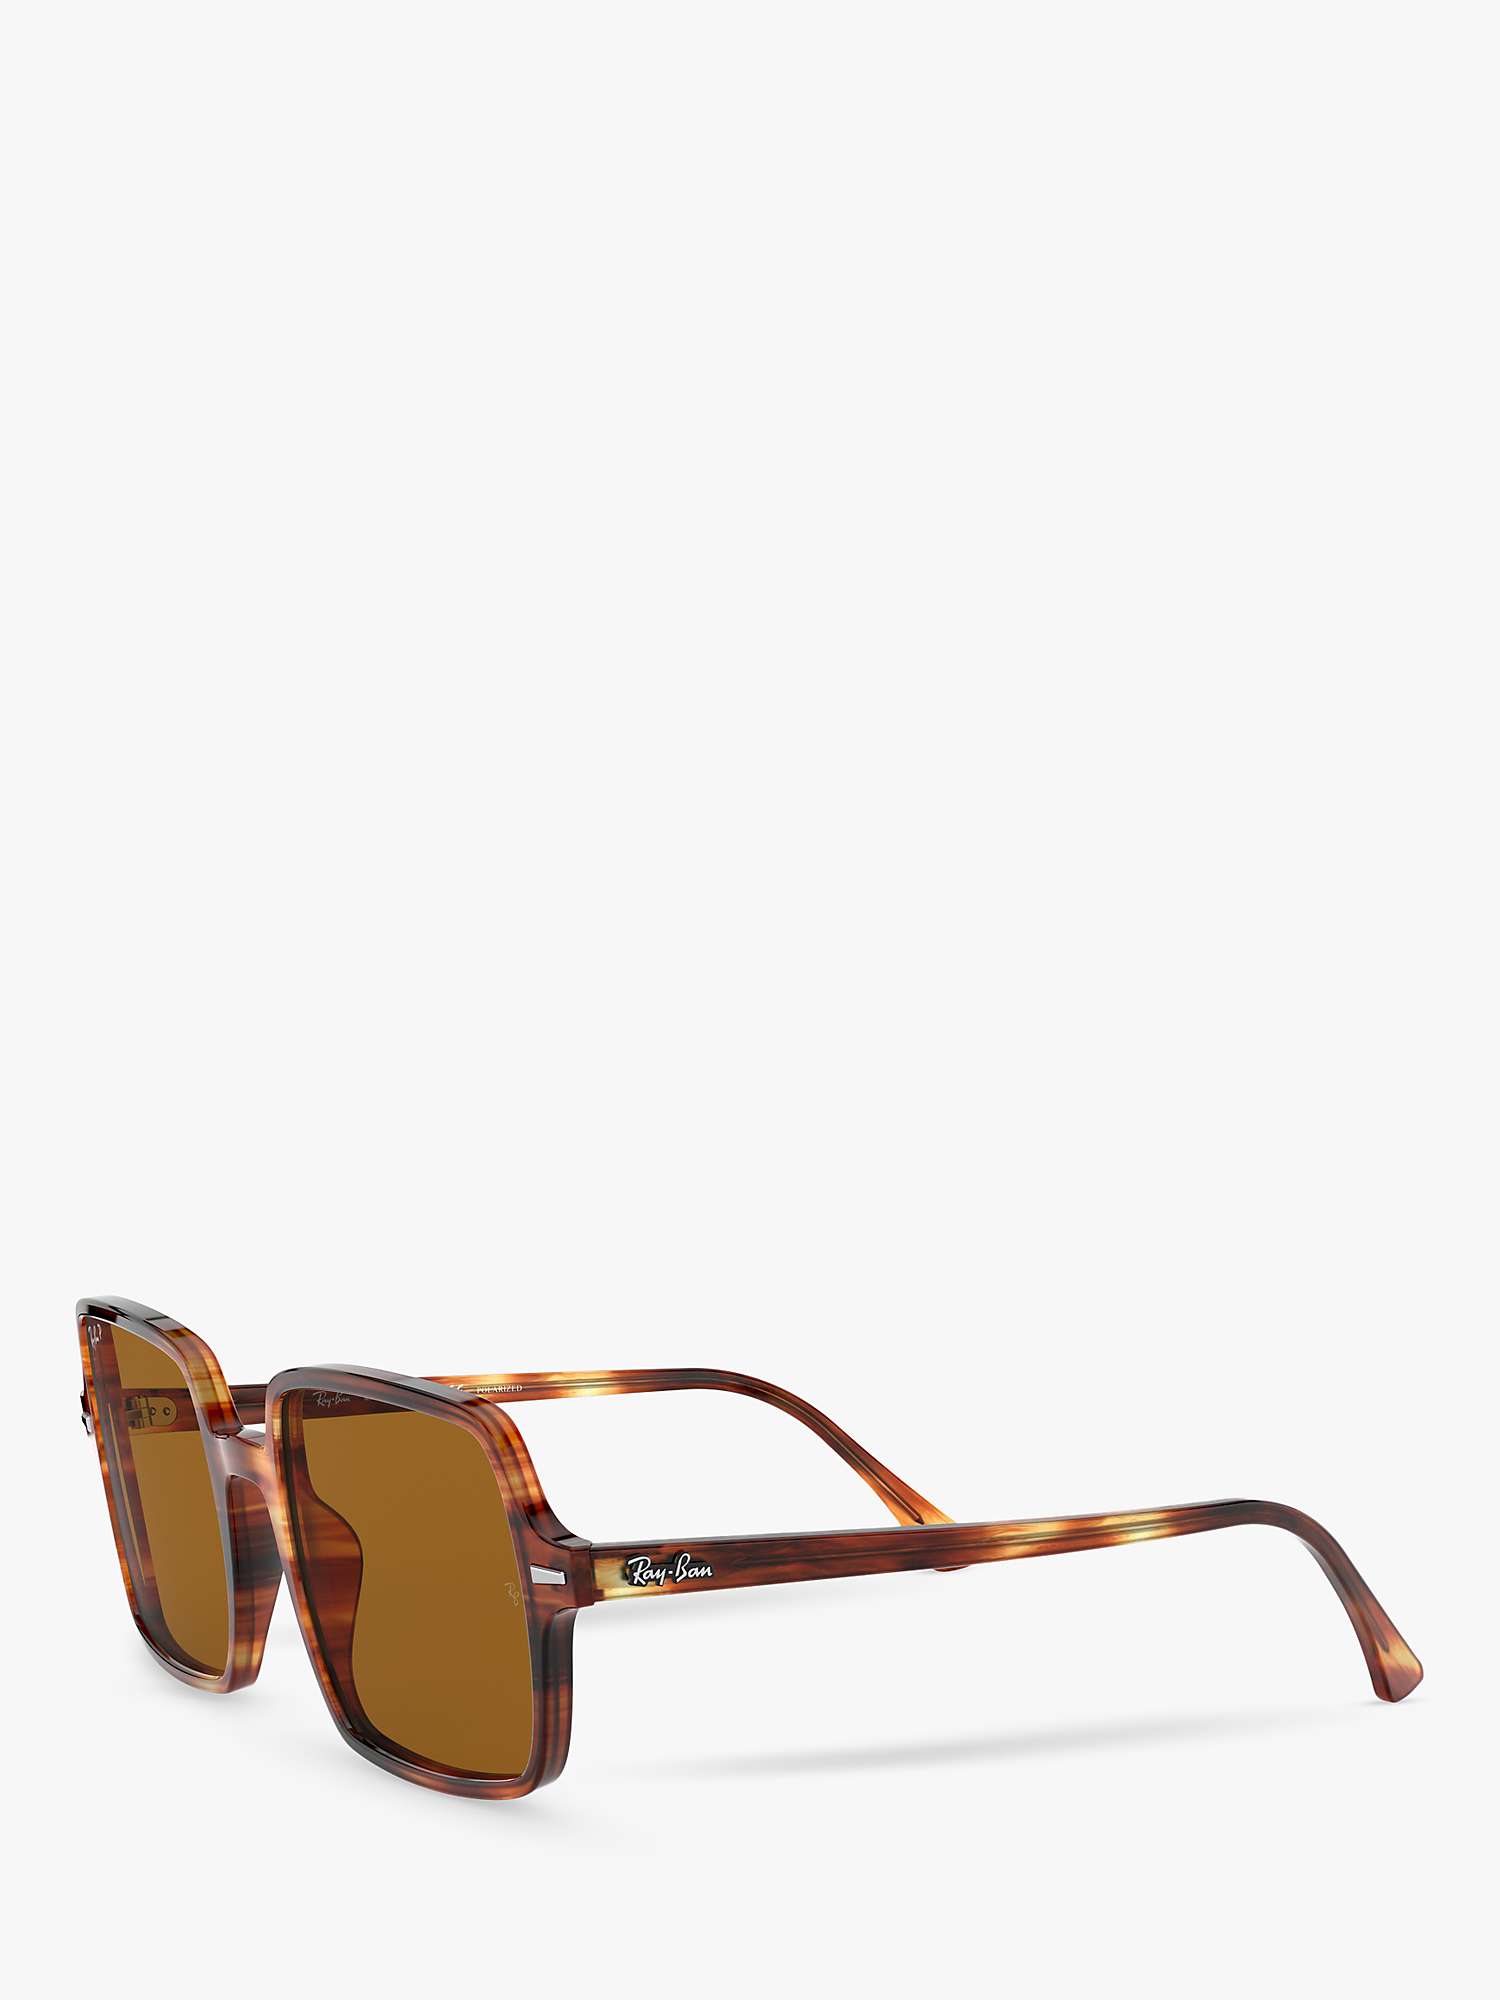 Buy Ray-Ban RB1973 Women's Polarised Square Sunglasses, Striped Havana/Brown Online at johnlewis.com